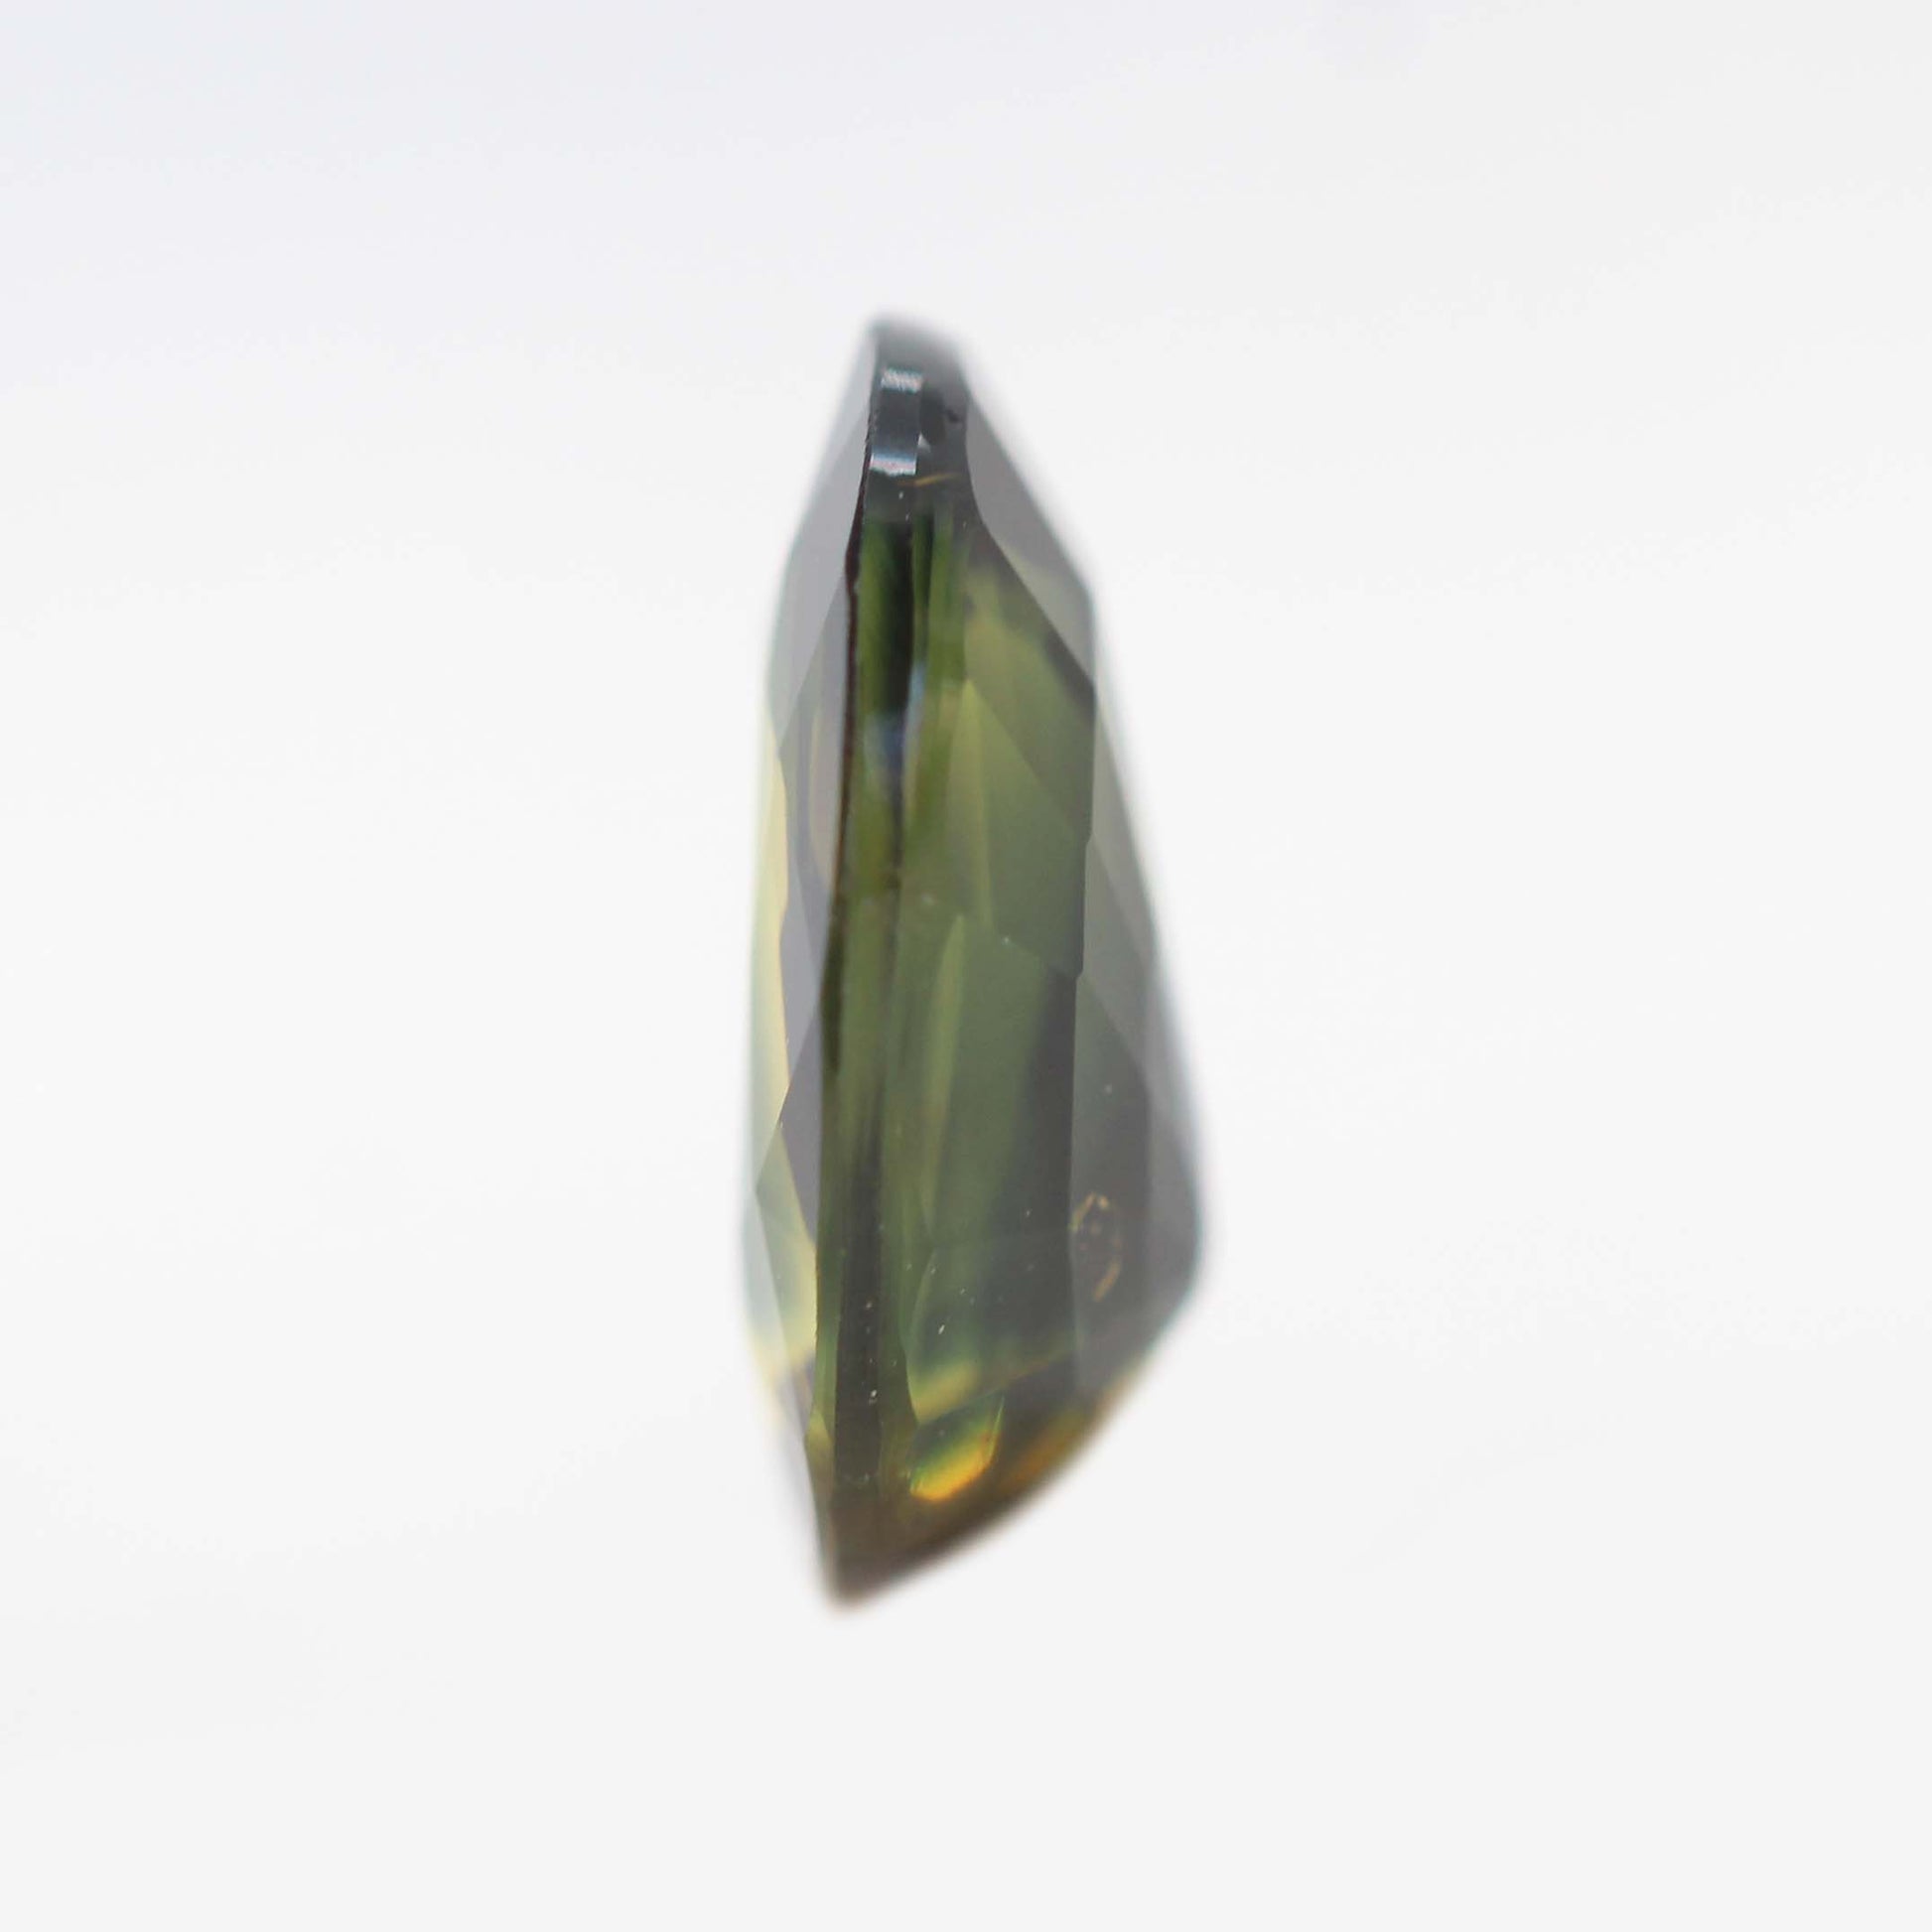 2.37 Carat Blue and Greenish Yellow Multi-Color Oval Sapphire for Custom Work - BYOSAP237 - Midwinter Co. Alternative Bridal Rings and Modern Fine Jewelry